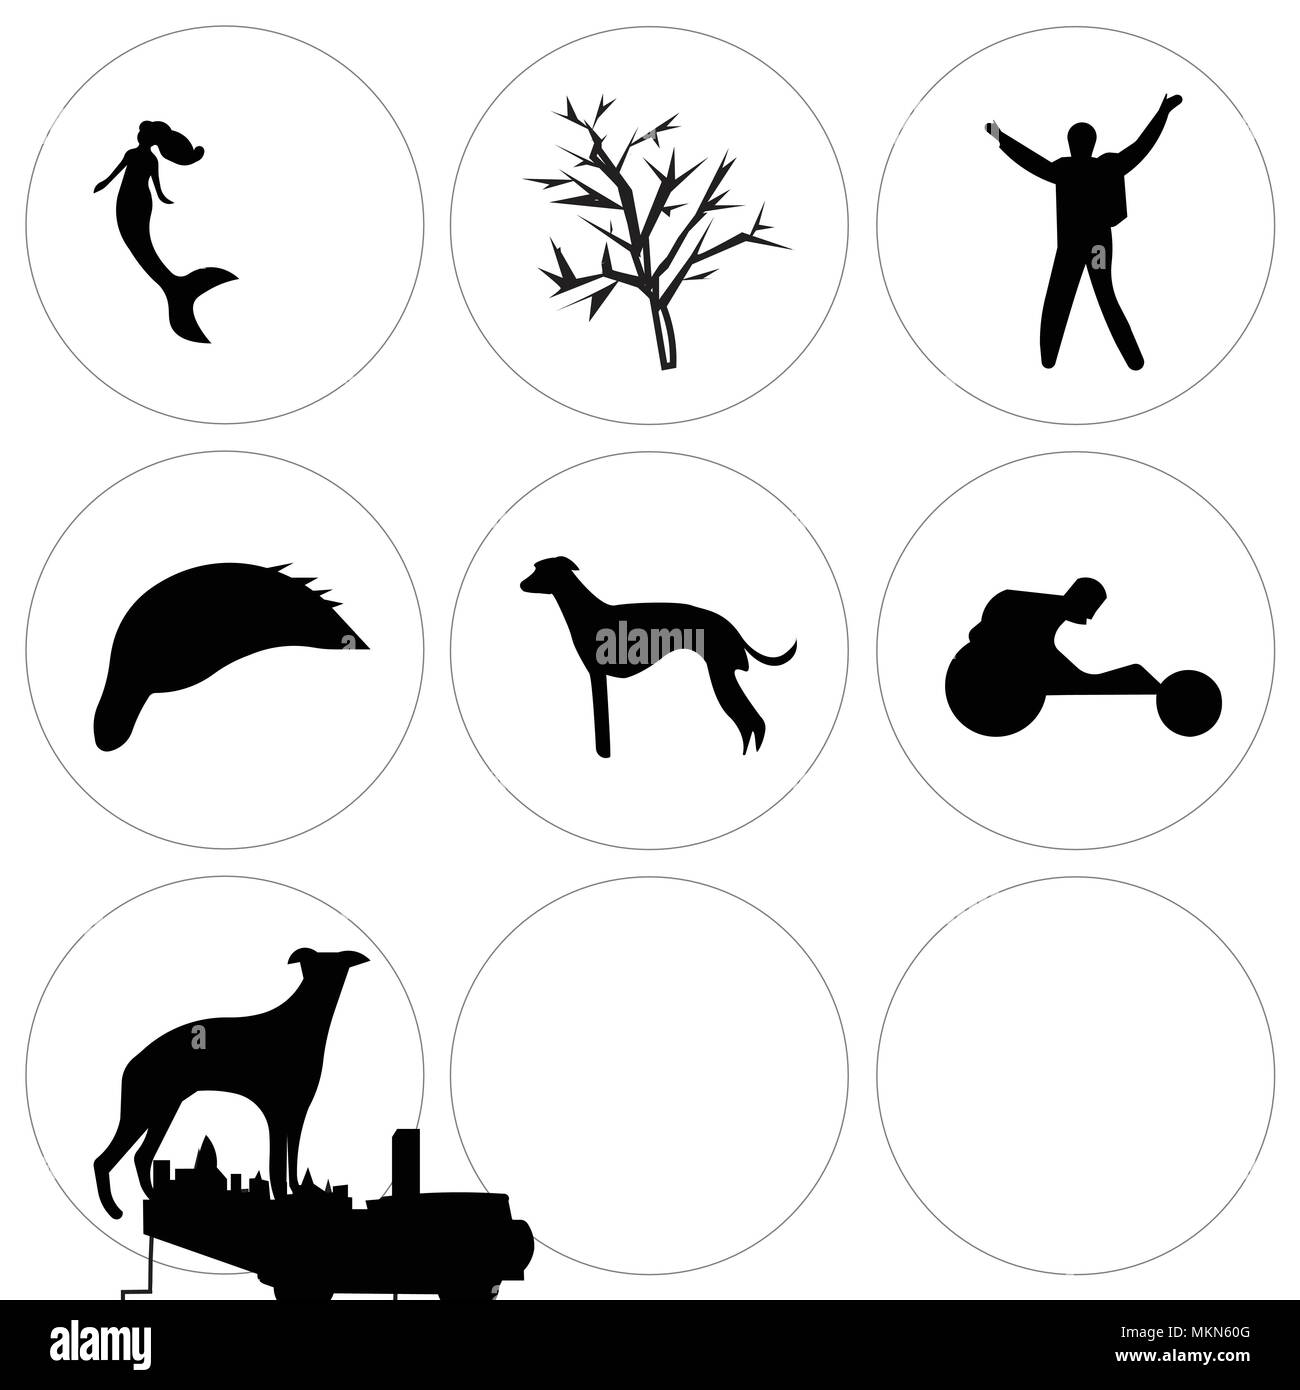 Set Of 9 simple editable icons such as whippet, wheelchair racing, edmonton sky, donald trump hair, elvis, mesquite tree, mermaid, car, can be used fo Stock Vector